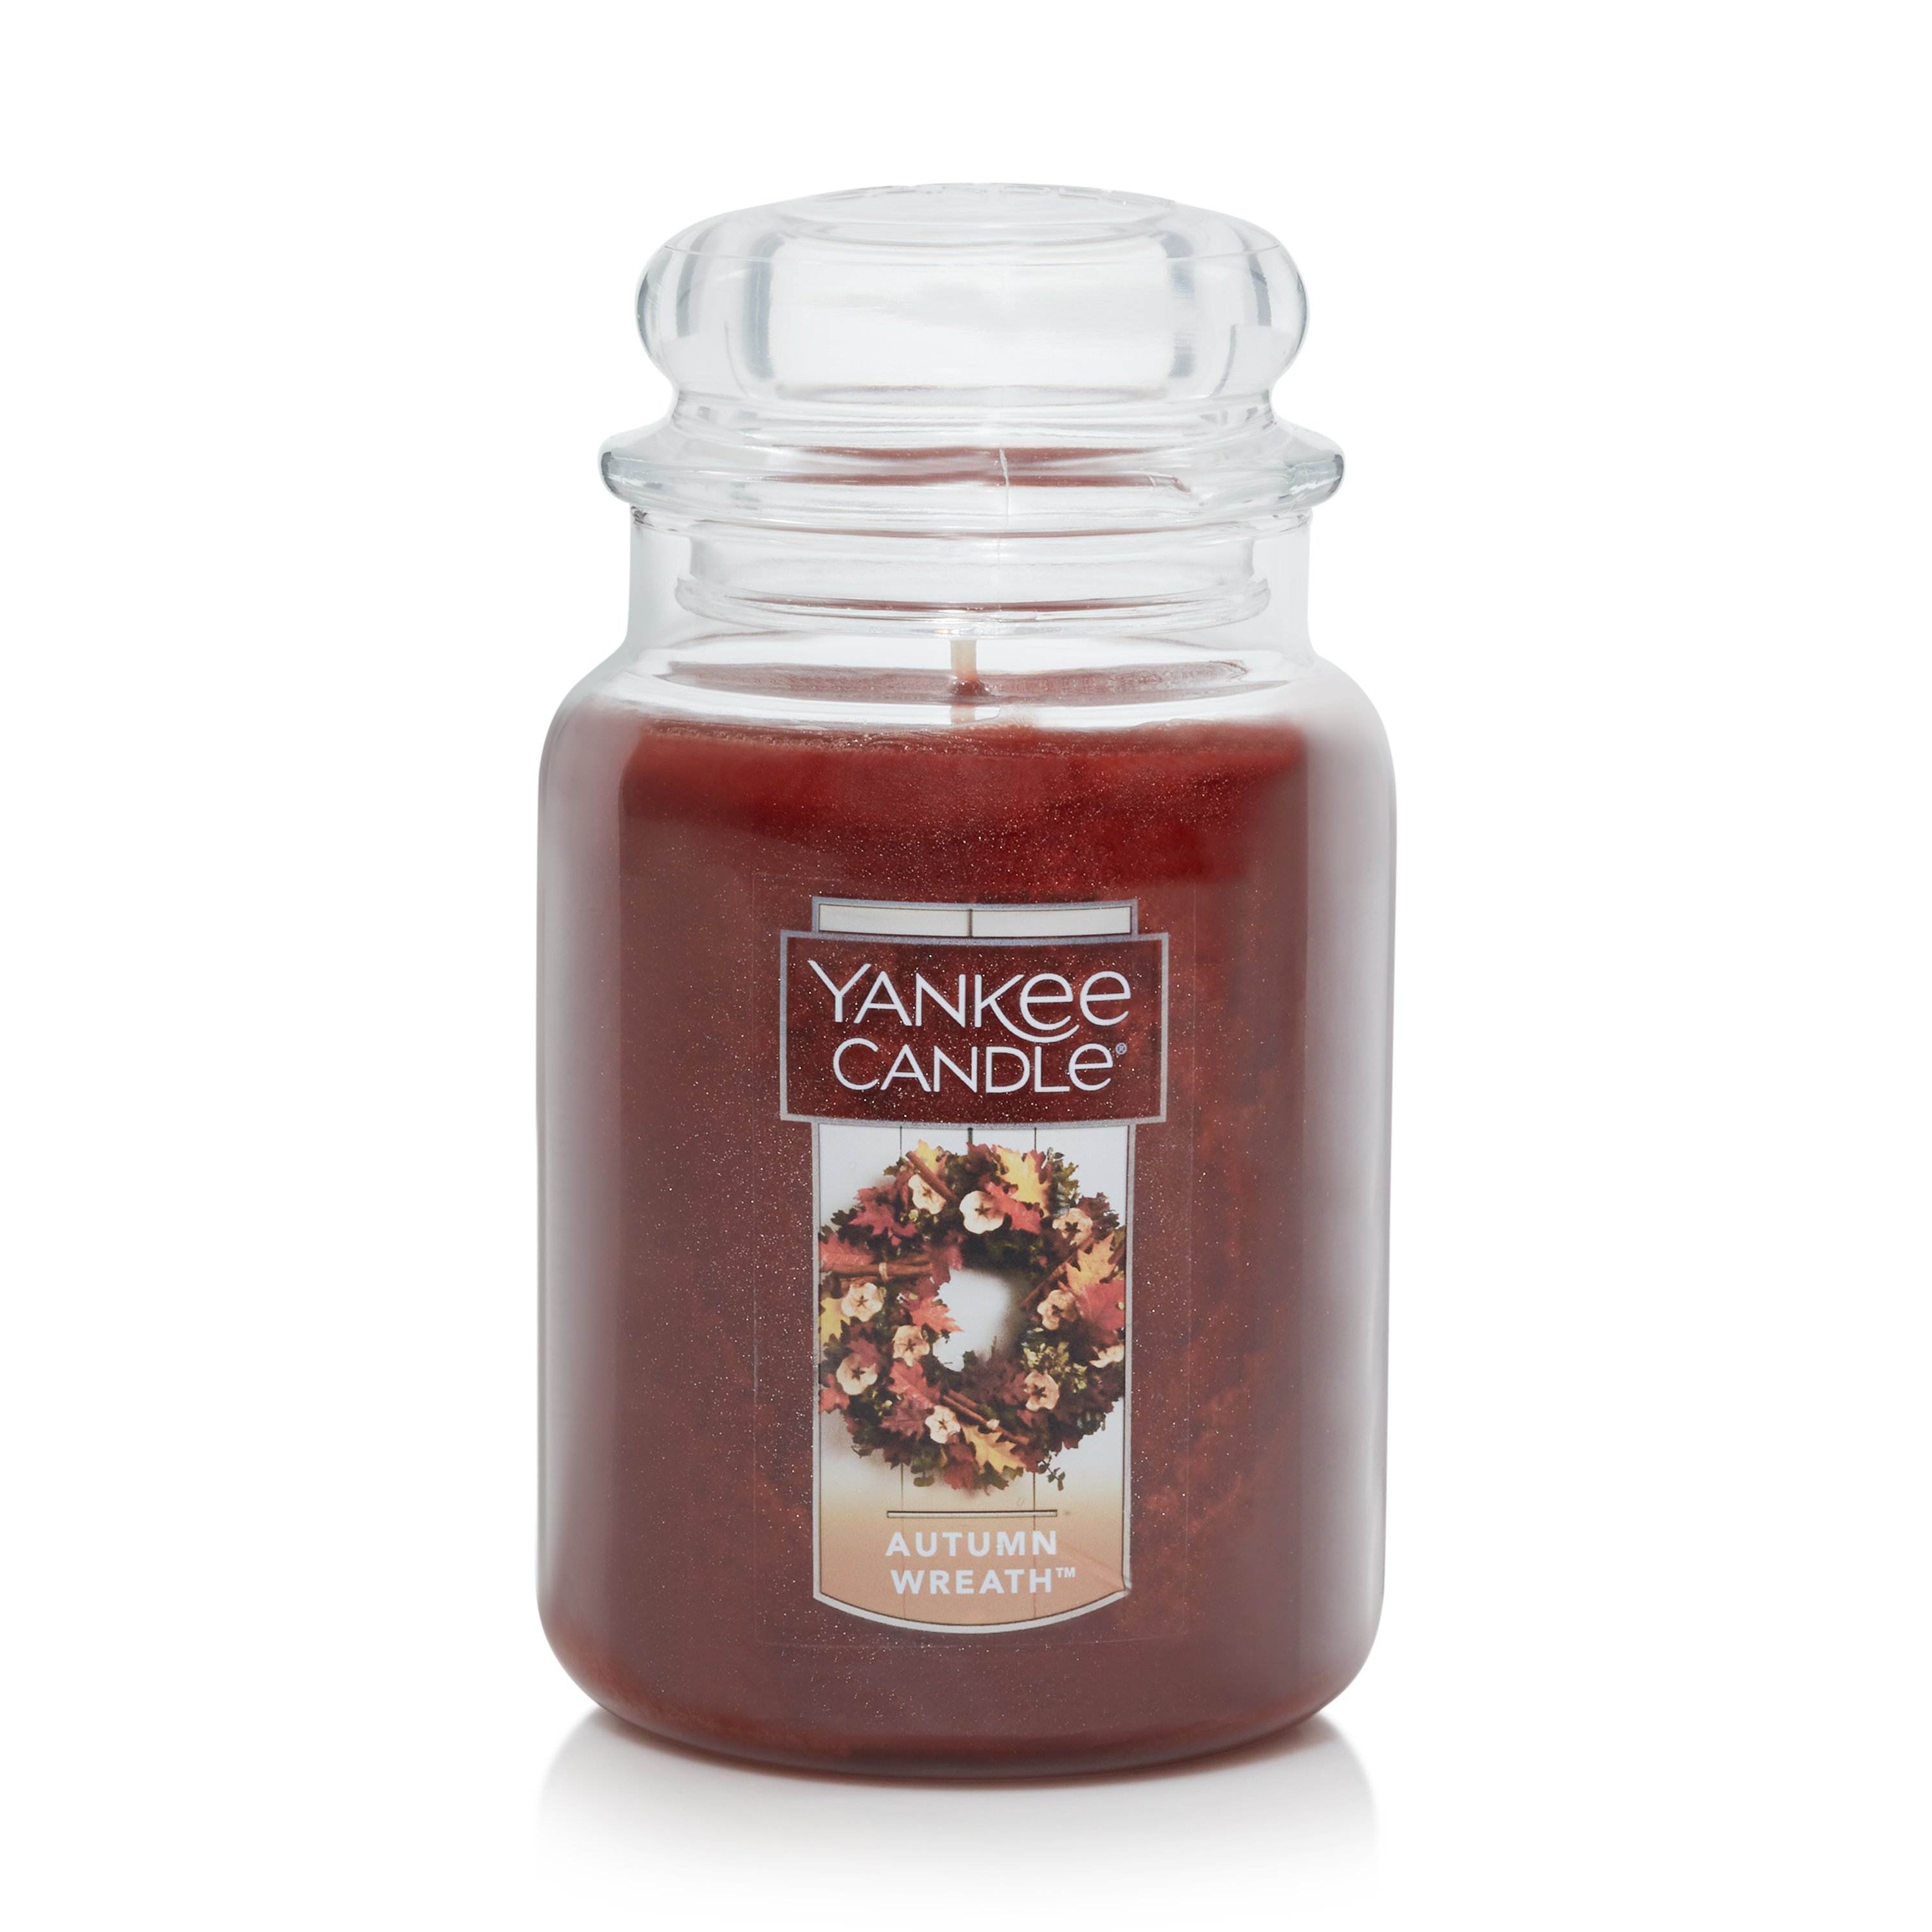 Yankee Candle Fall 2018 - Autumn and Fall Yankee Candle Fragrances